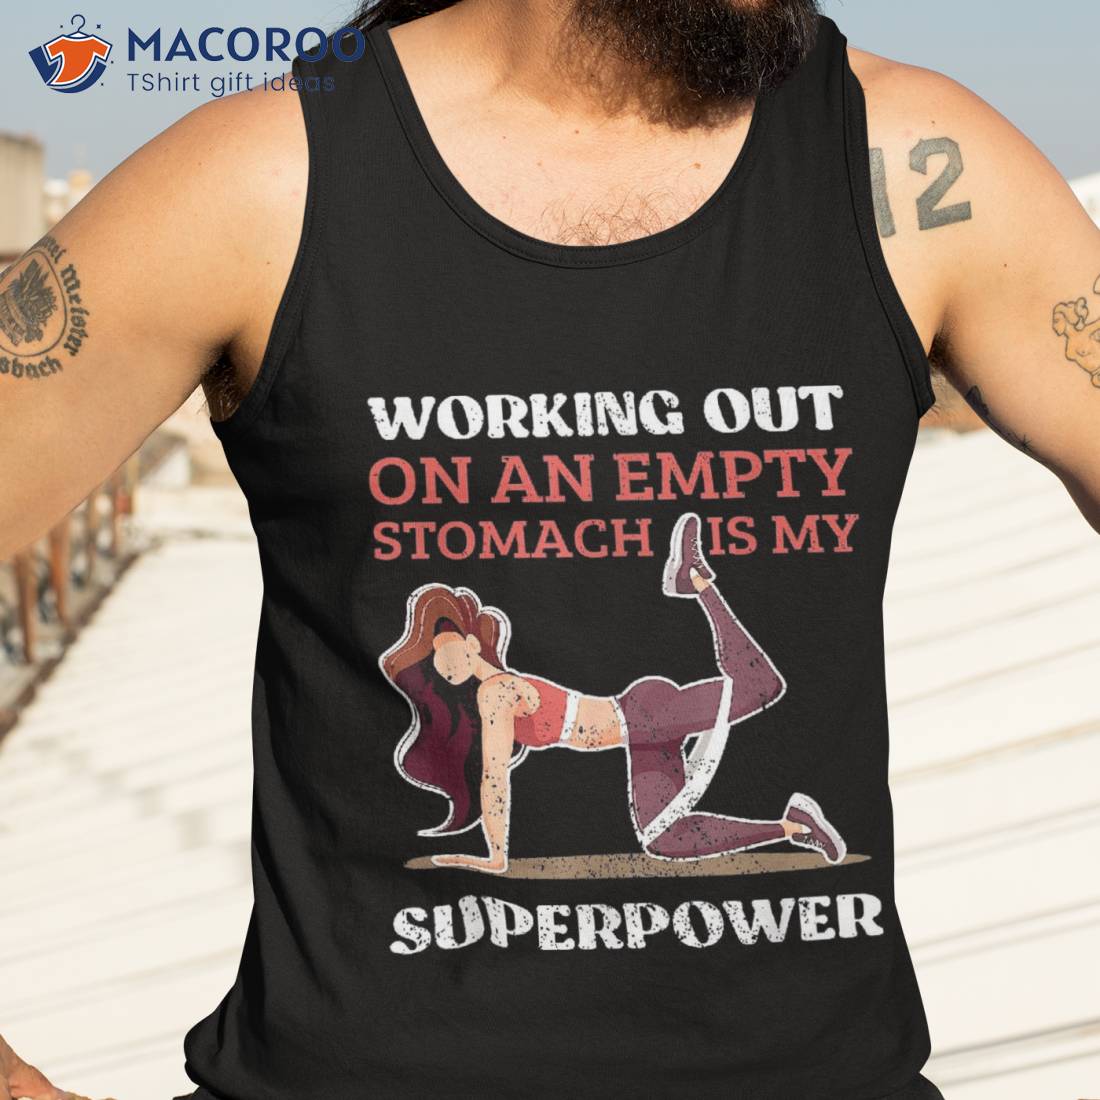 https://images.macoroo.com/wp-content/uploads/2023/06/fitness-gym-weight-loss-muscle-strength-full-body-training-shirt-tank-top-3.jpg